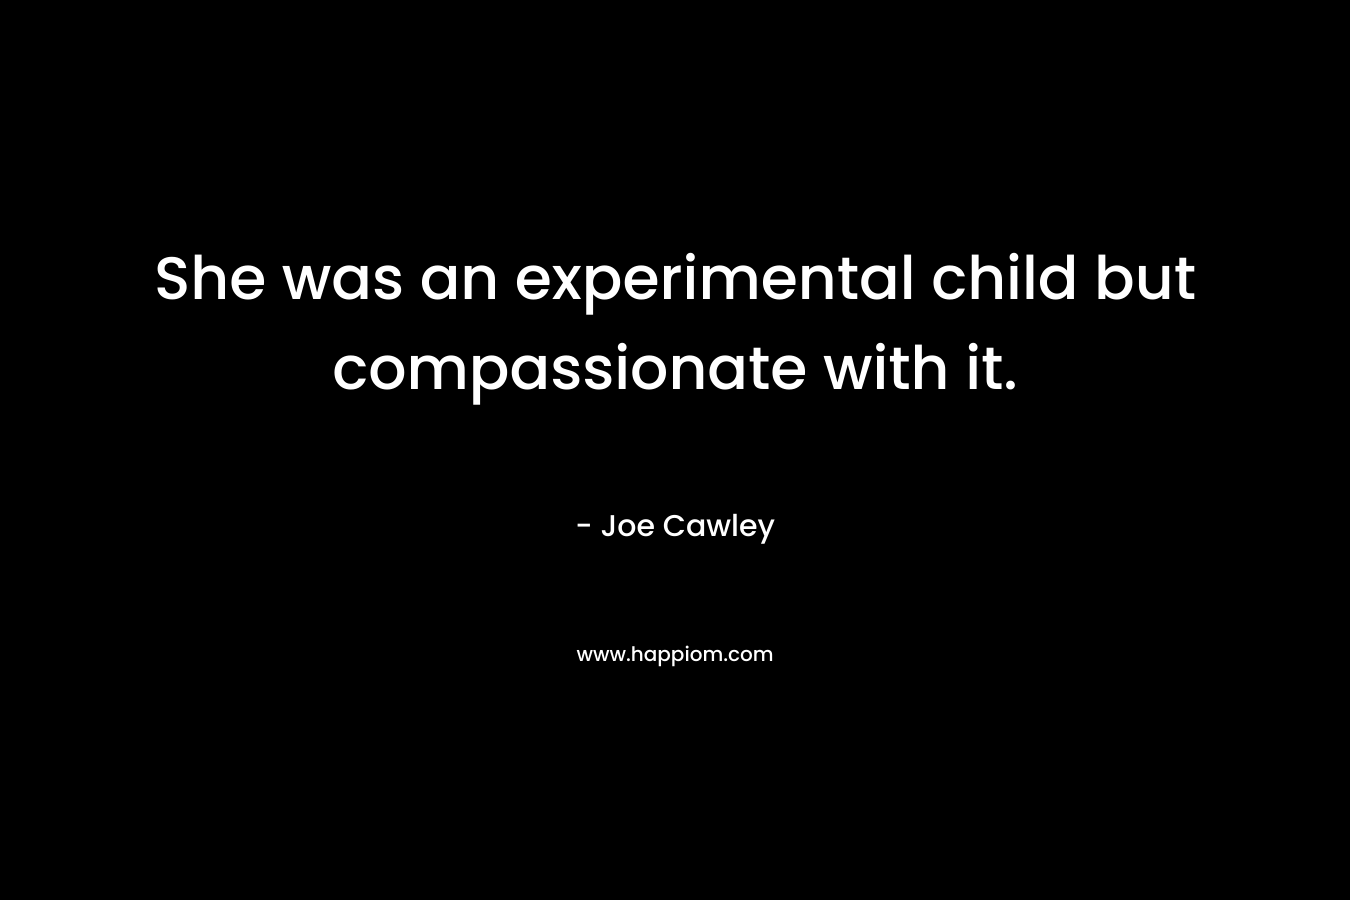 She was an experimental child but compassionate with it. – Joe Cawley